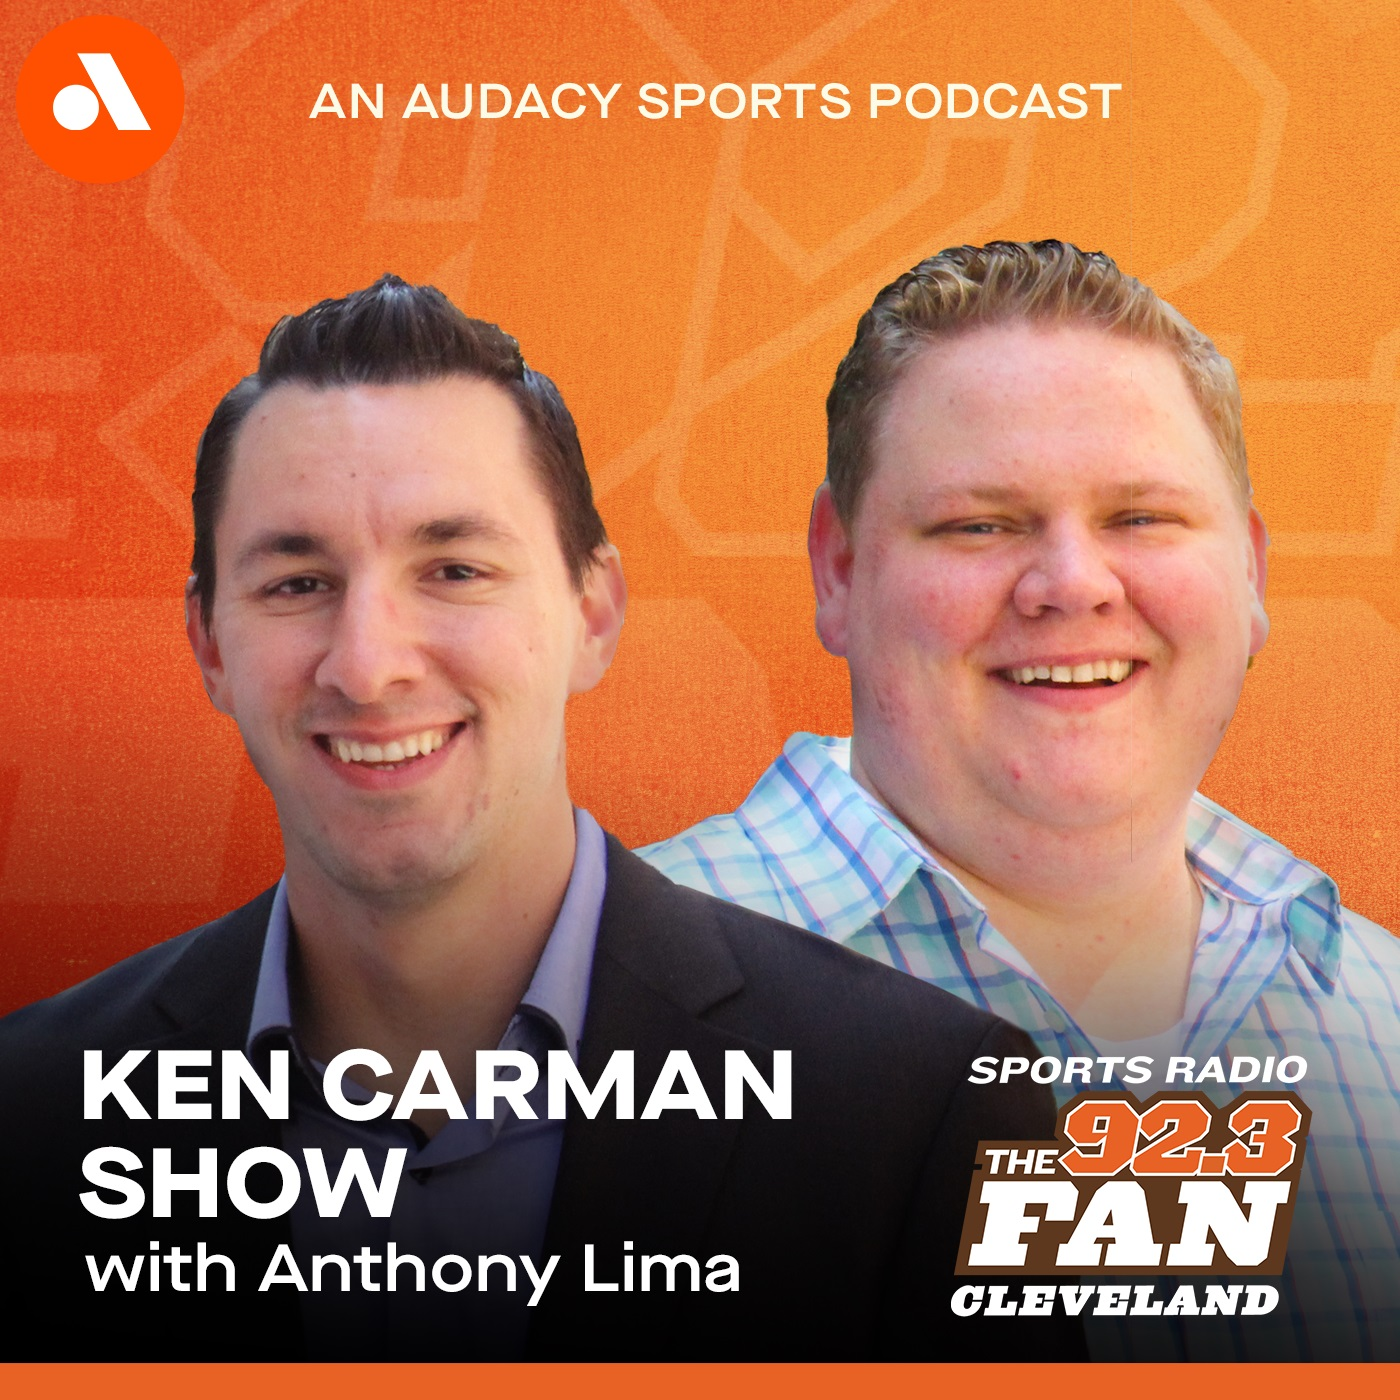 The Ken Carman Show with Anthony Lima: 7 in Heaven Week 1